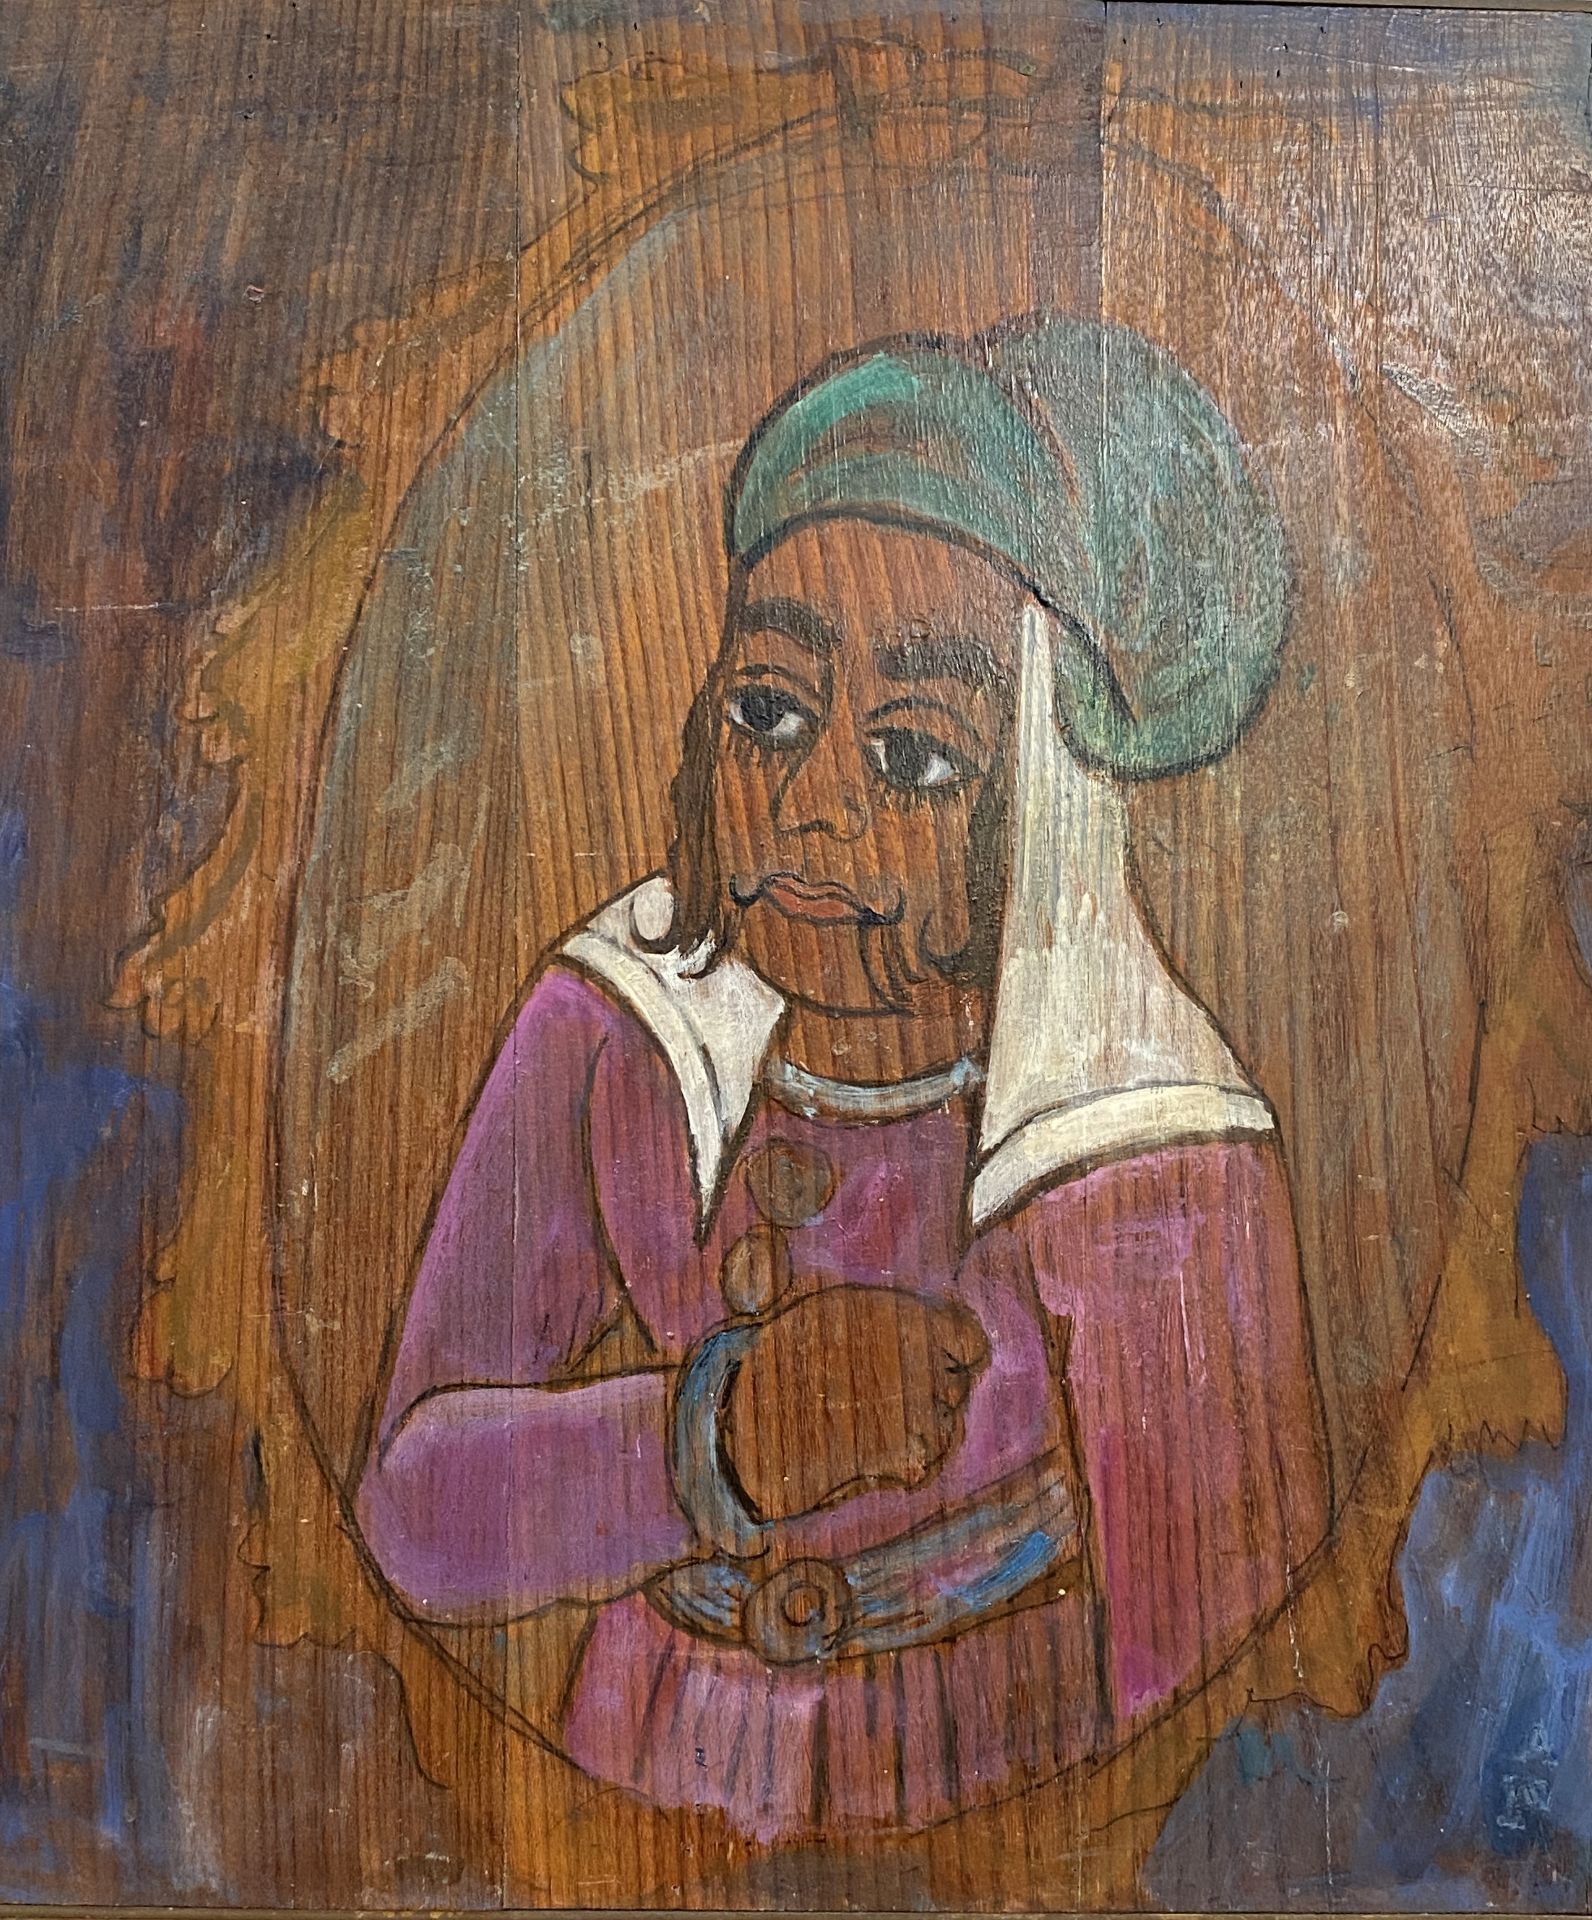 Painting on wood "Persian Prince", by Alex Porter